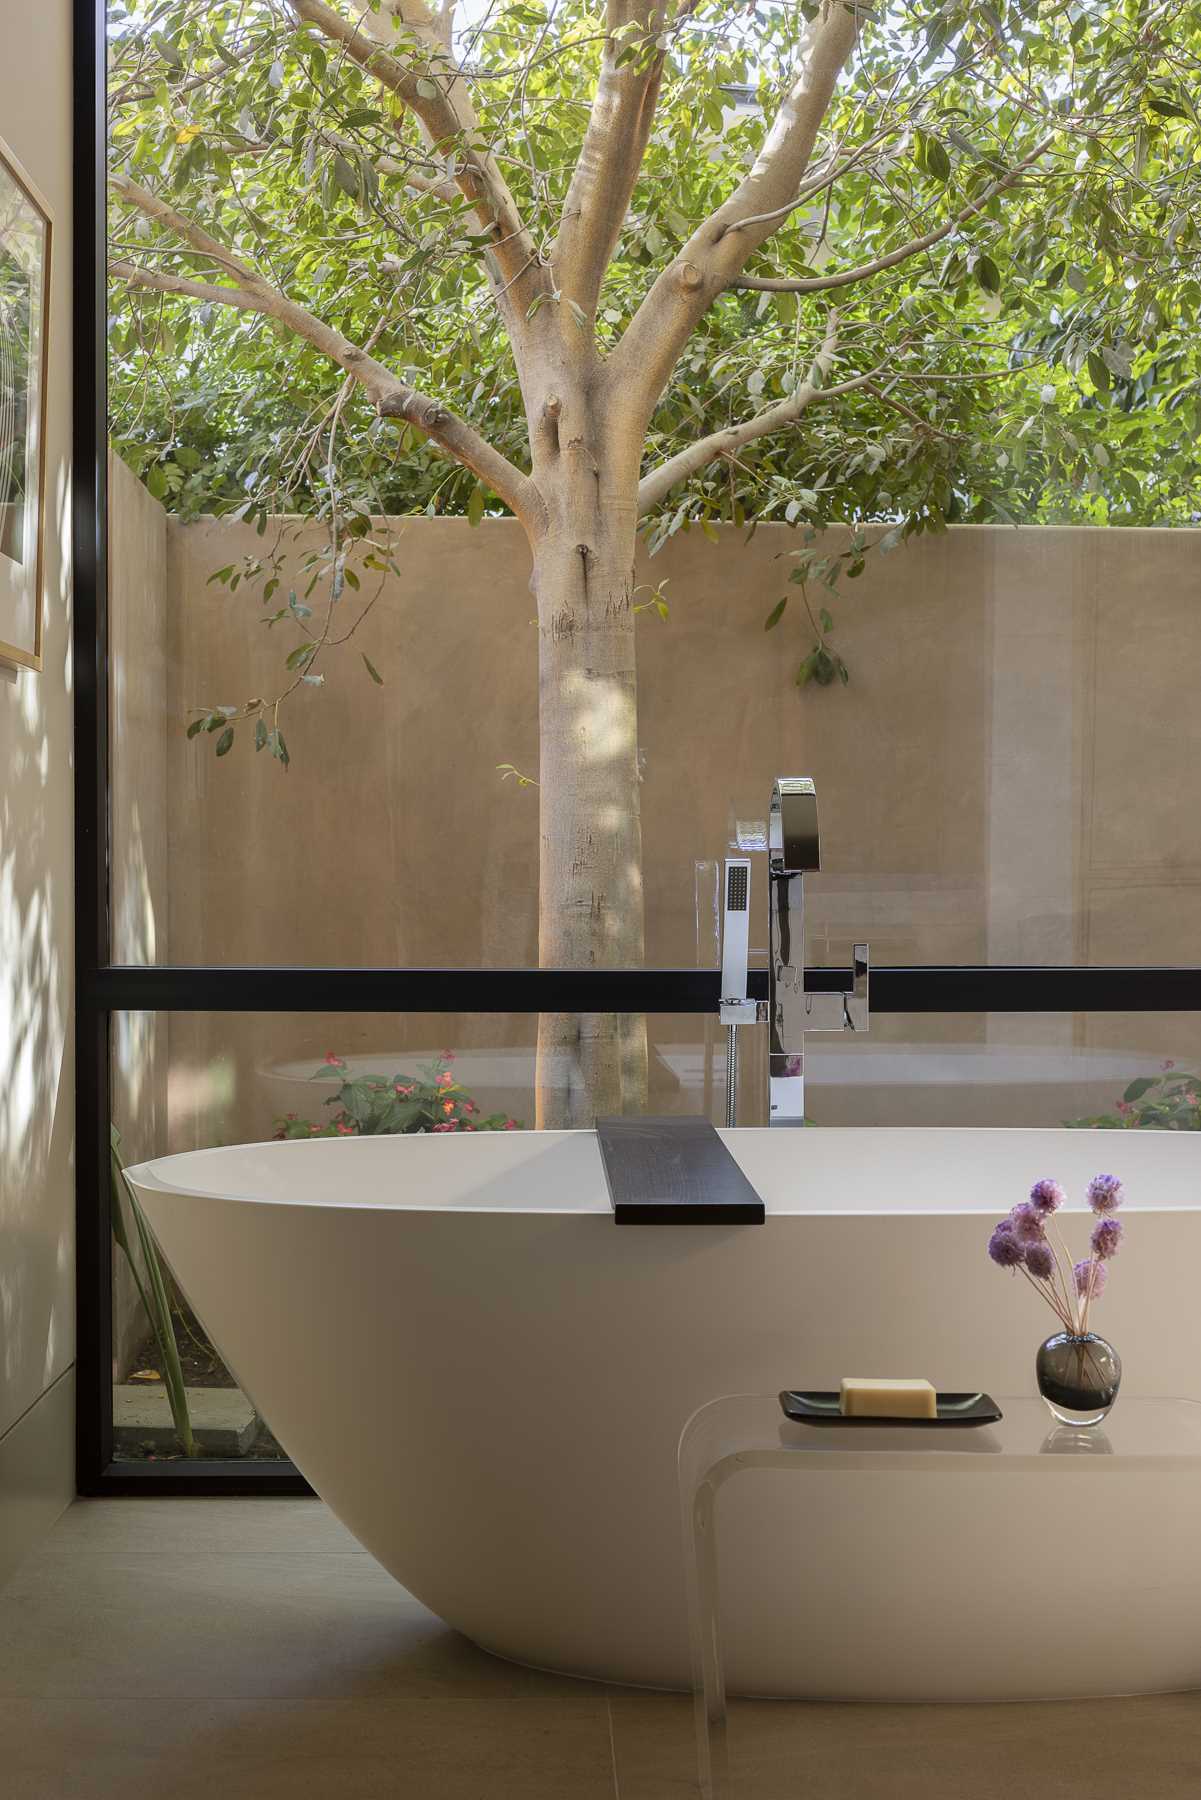 In a bathroom, skylights provide natural light, while the windows frame the tree views from the bath and the s،wer.